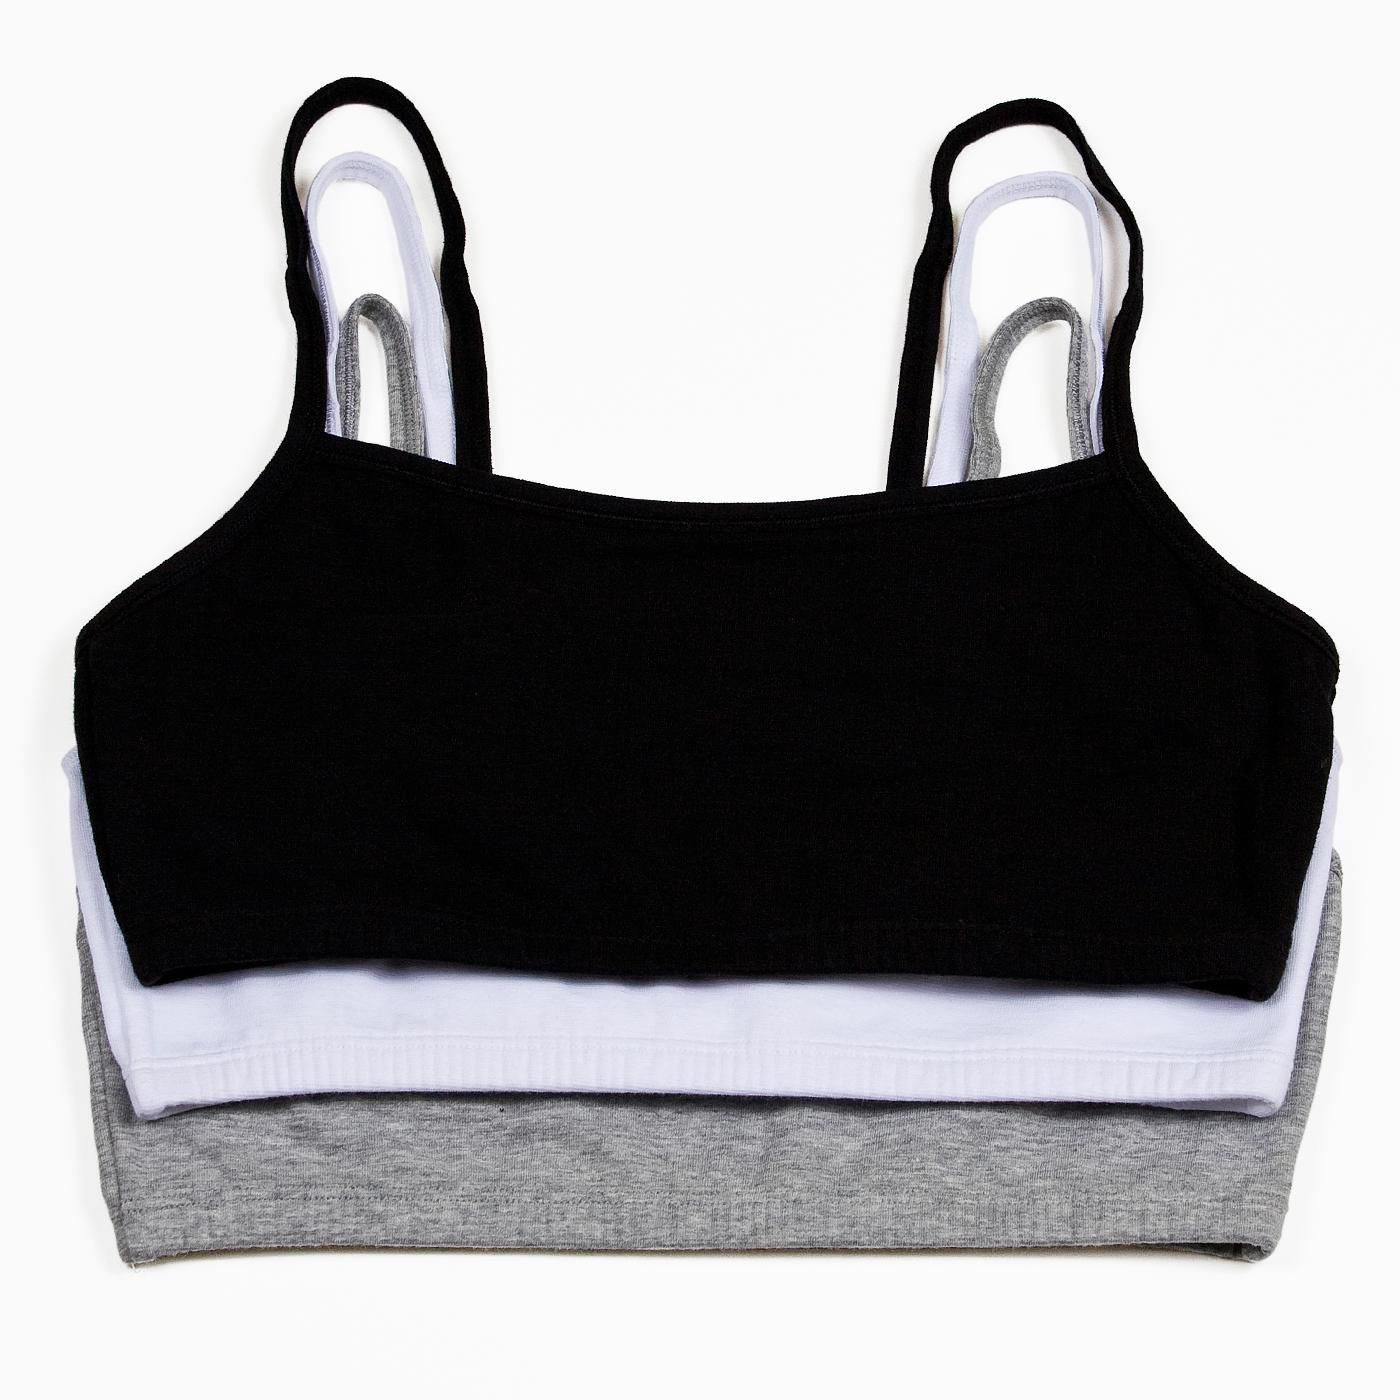 Fruit of the Loom Womens Built-Up Sports Bra, Pack of 3 